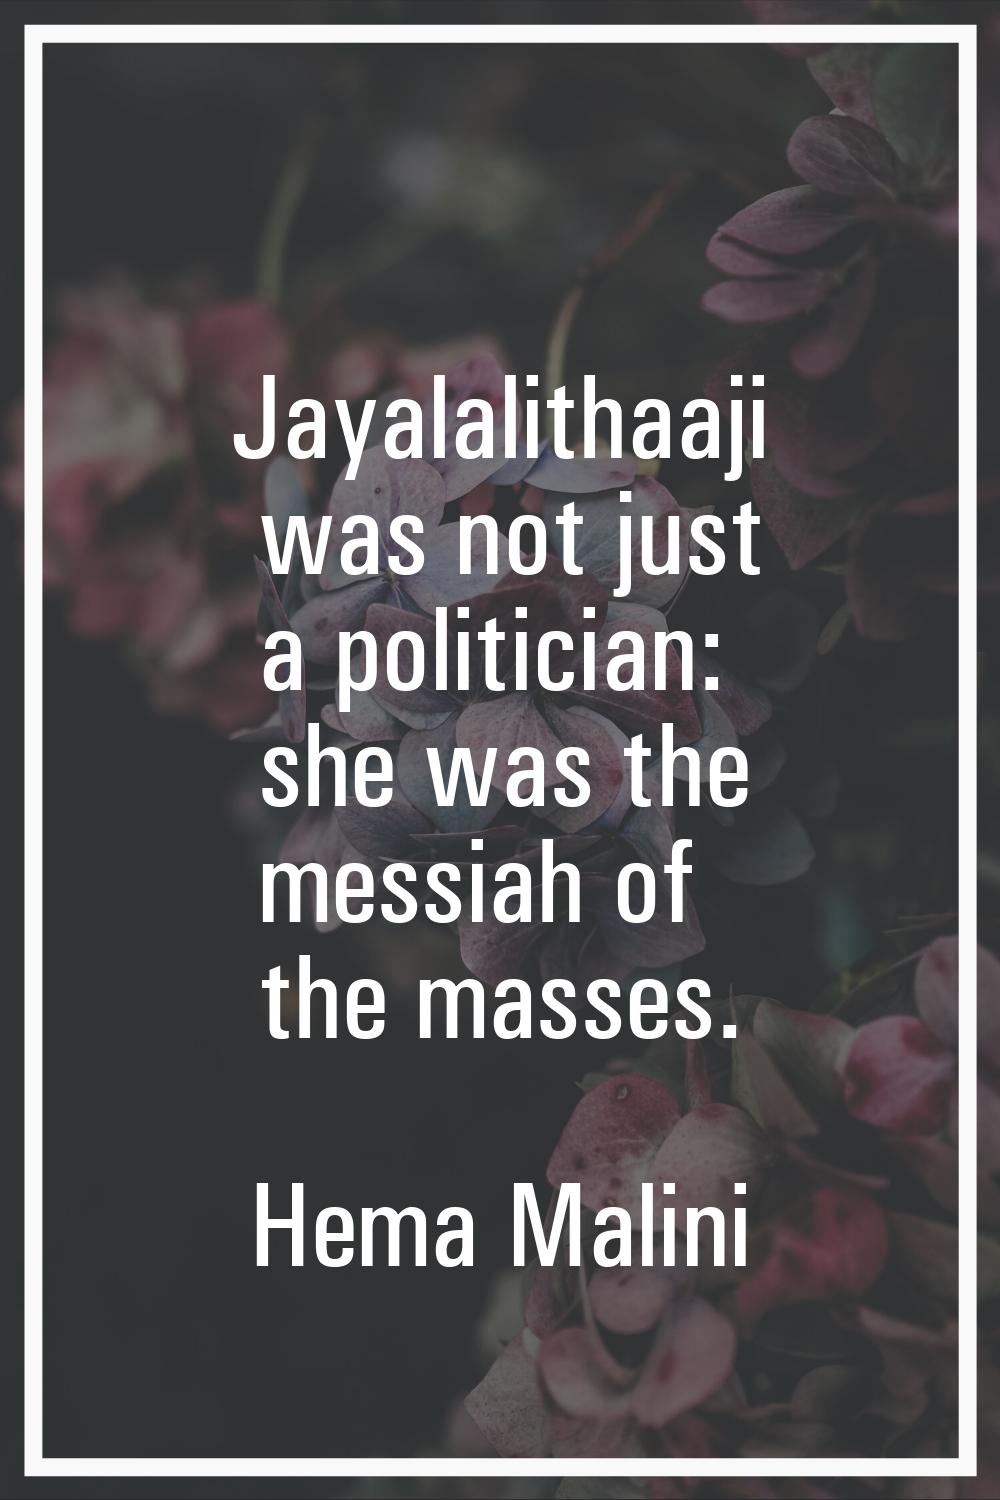 Jayalalithaaji was not just a politician: she was the messiah of the masses.